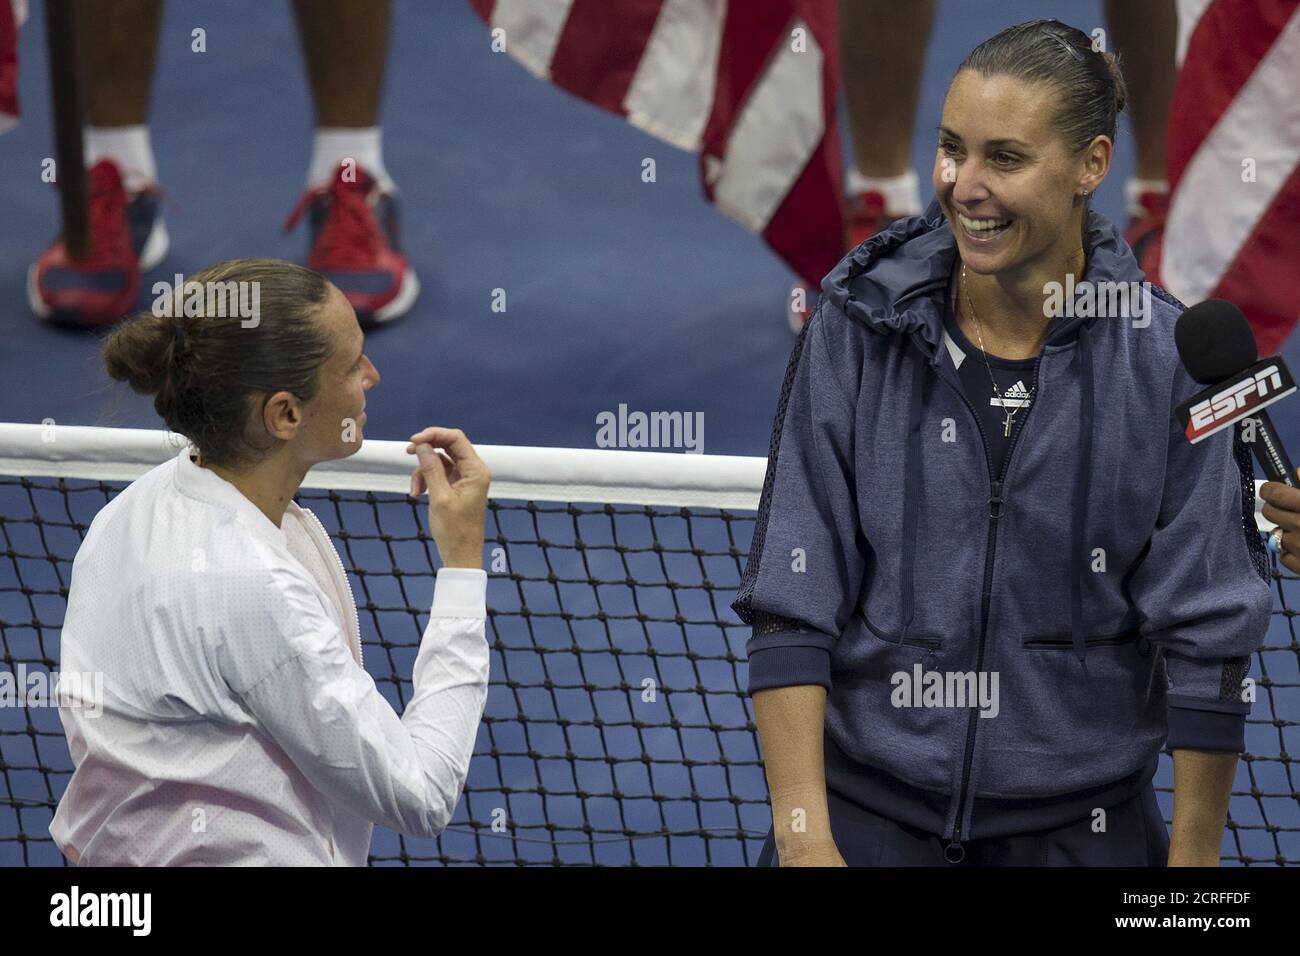 Roberta Vinci (L) of Italy gestures to compatriot Flavia Pennetta after the latter said she was going to retire from professional tennis after winning the women's singles final match at the U.S. Open Championships tennis tournament in New York, September 12, 2015. REUTERS/Carlo Allegri Stock Photo